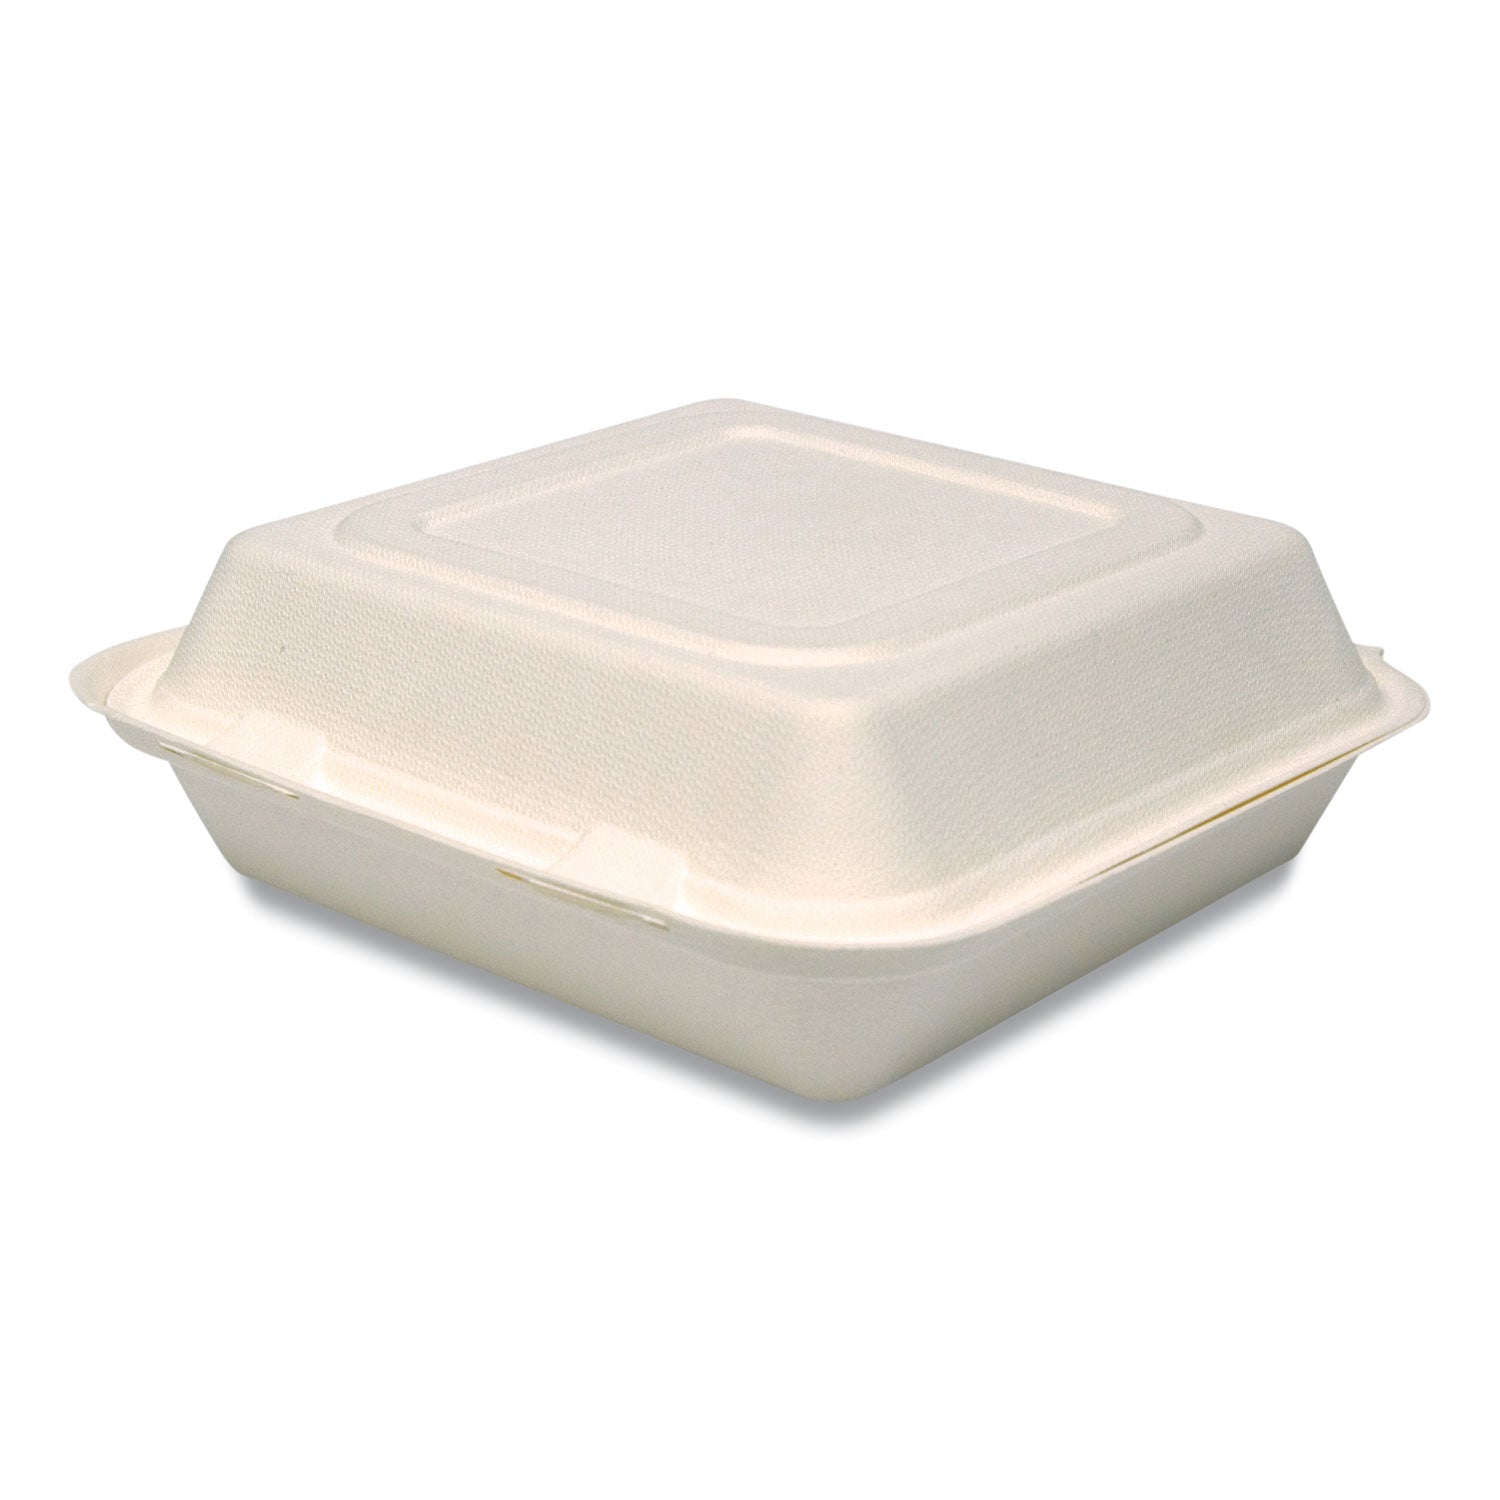 bare-eco-forward-bagasse-hinged-lid-containers-proplanet-seal-3-compartment-96-x-94-x-32-ivory-sugarcane-200-carton_scchc9csc2050 - 3